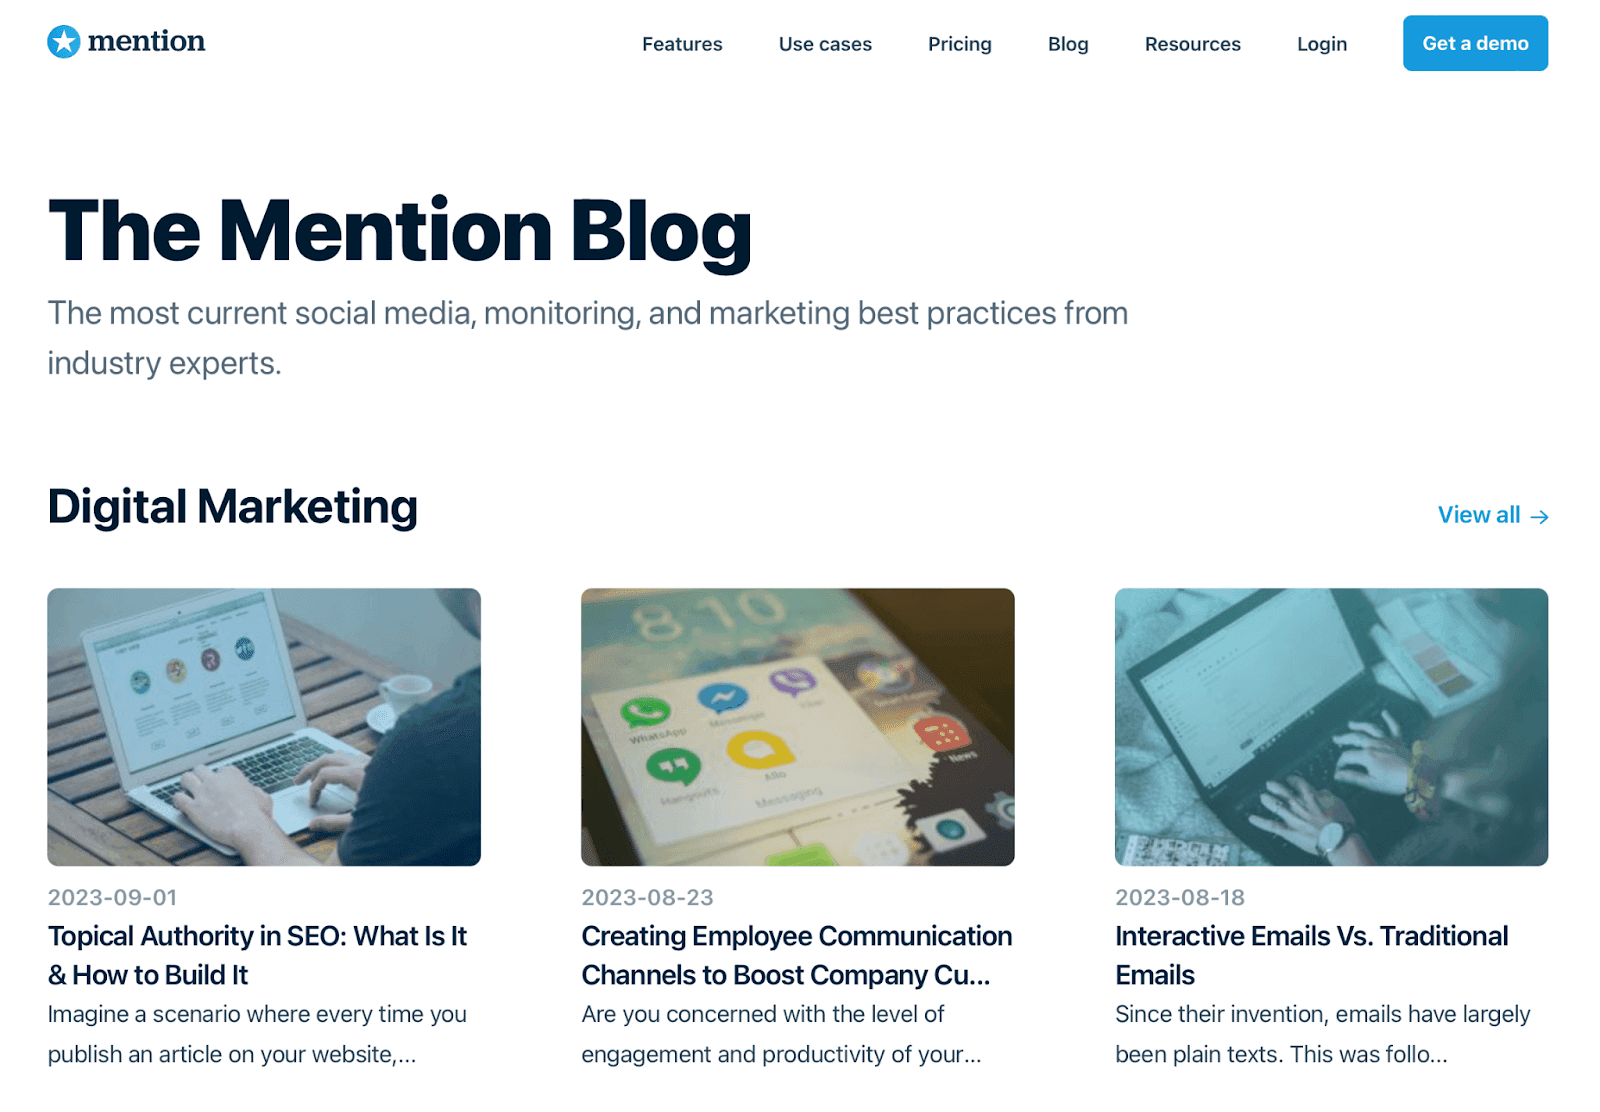 The Mention Blog - The most current social media, monitoring, and marketing best practices from industry experts.